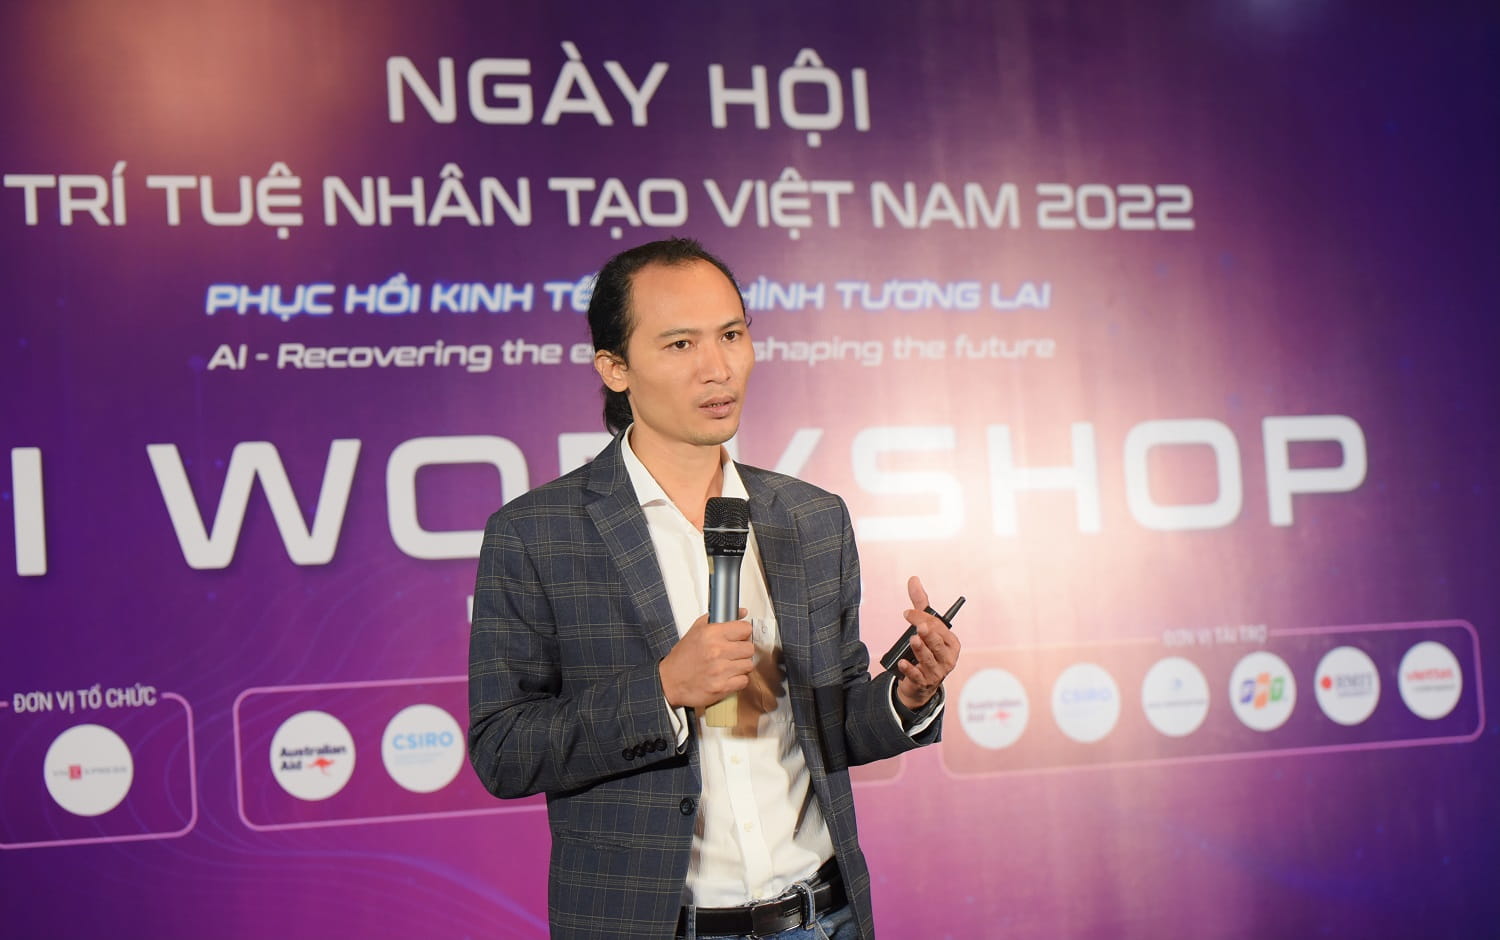 Mr. Vu Hong Chien - Director of QAI - shared his thought at the AI4VN event